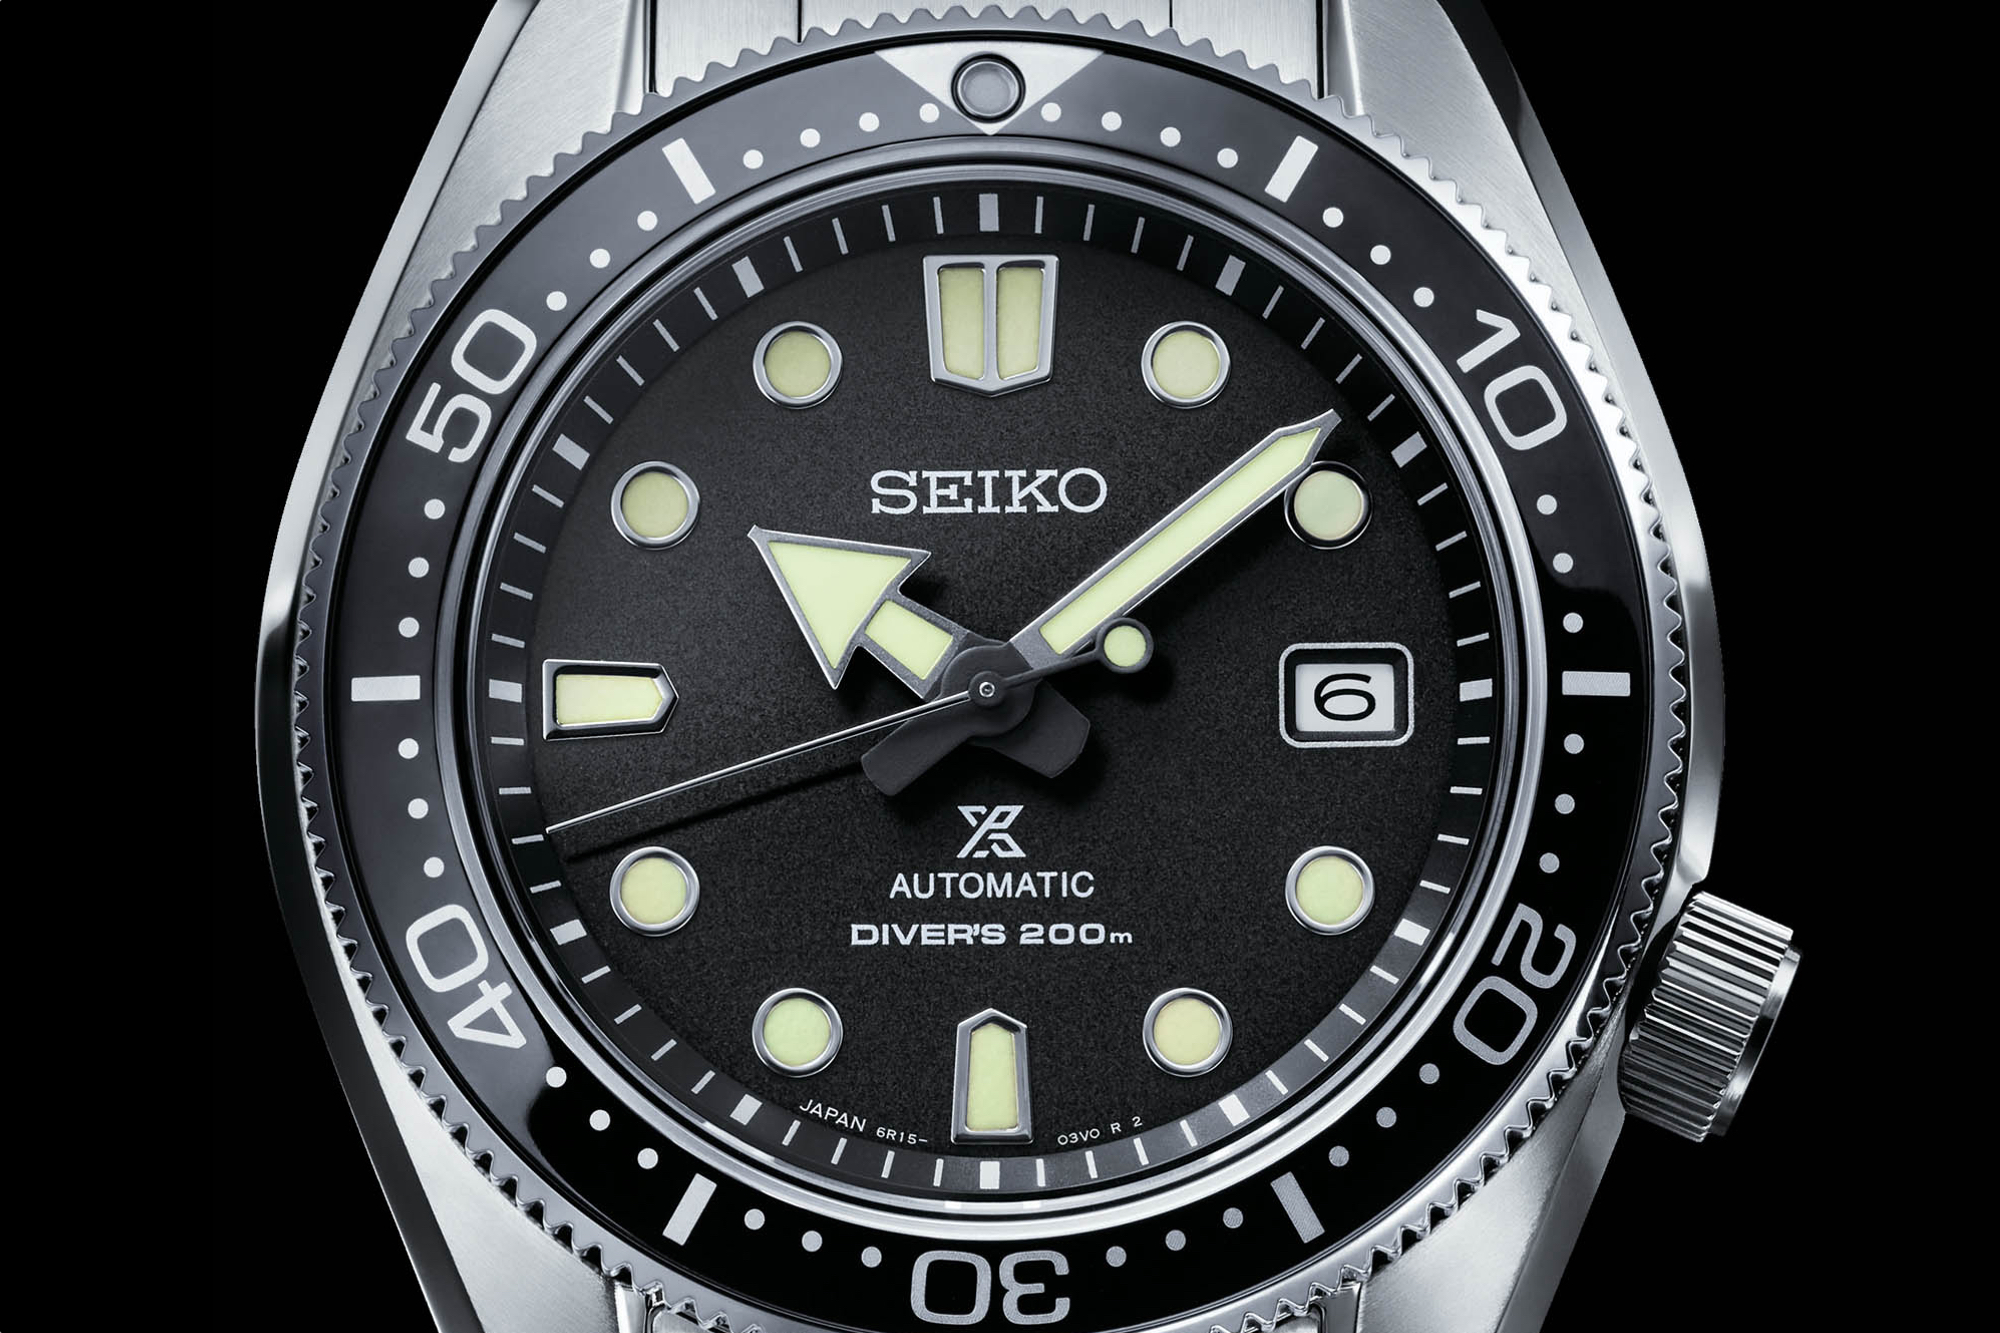 Introducing the Seiko SPB077 and SPB079 Divers